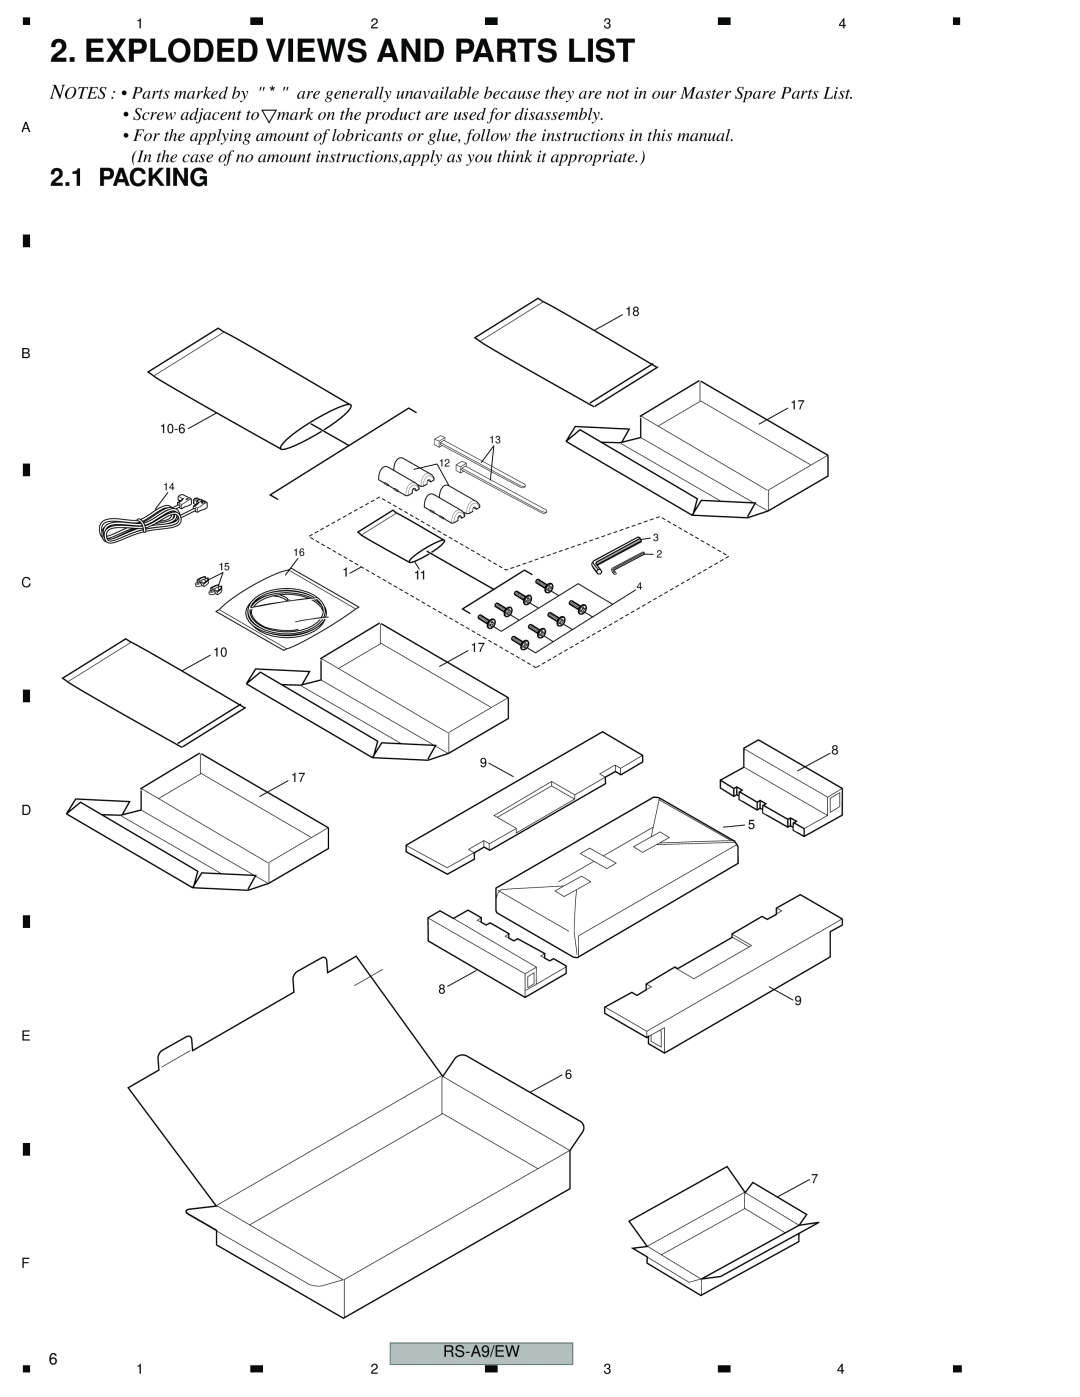 Pioneer RS-A9/EW manual Packing, Exploded Views And Parts List 